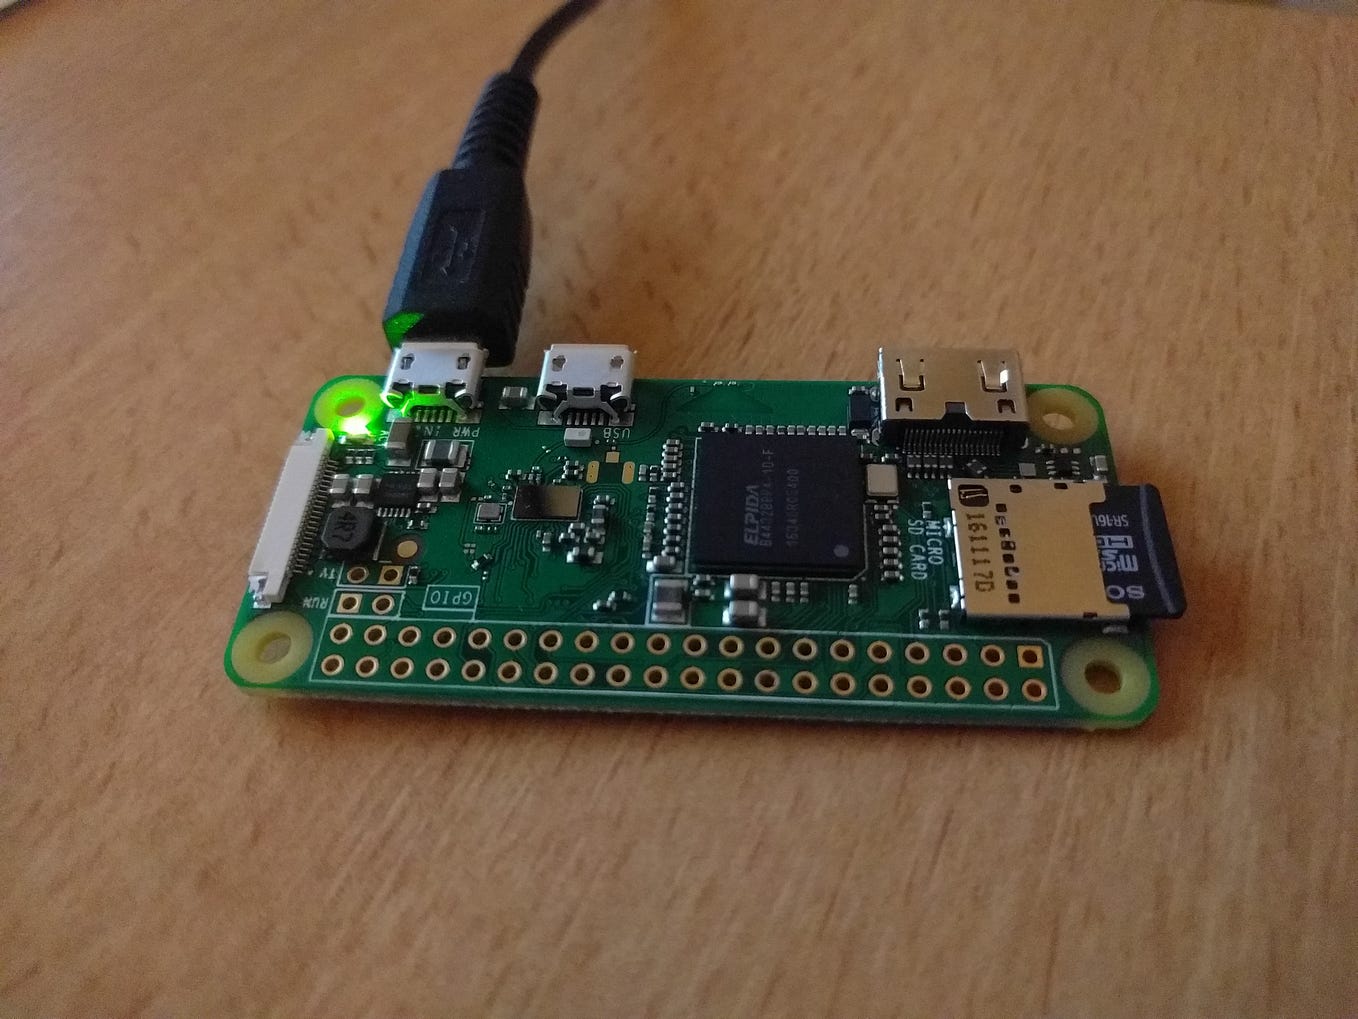 How to install Node.JS and NPM on Raspberry Pi Zero or other ARM V6 device  | by Dani Dudas | Medium